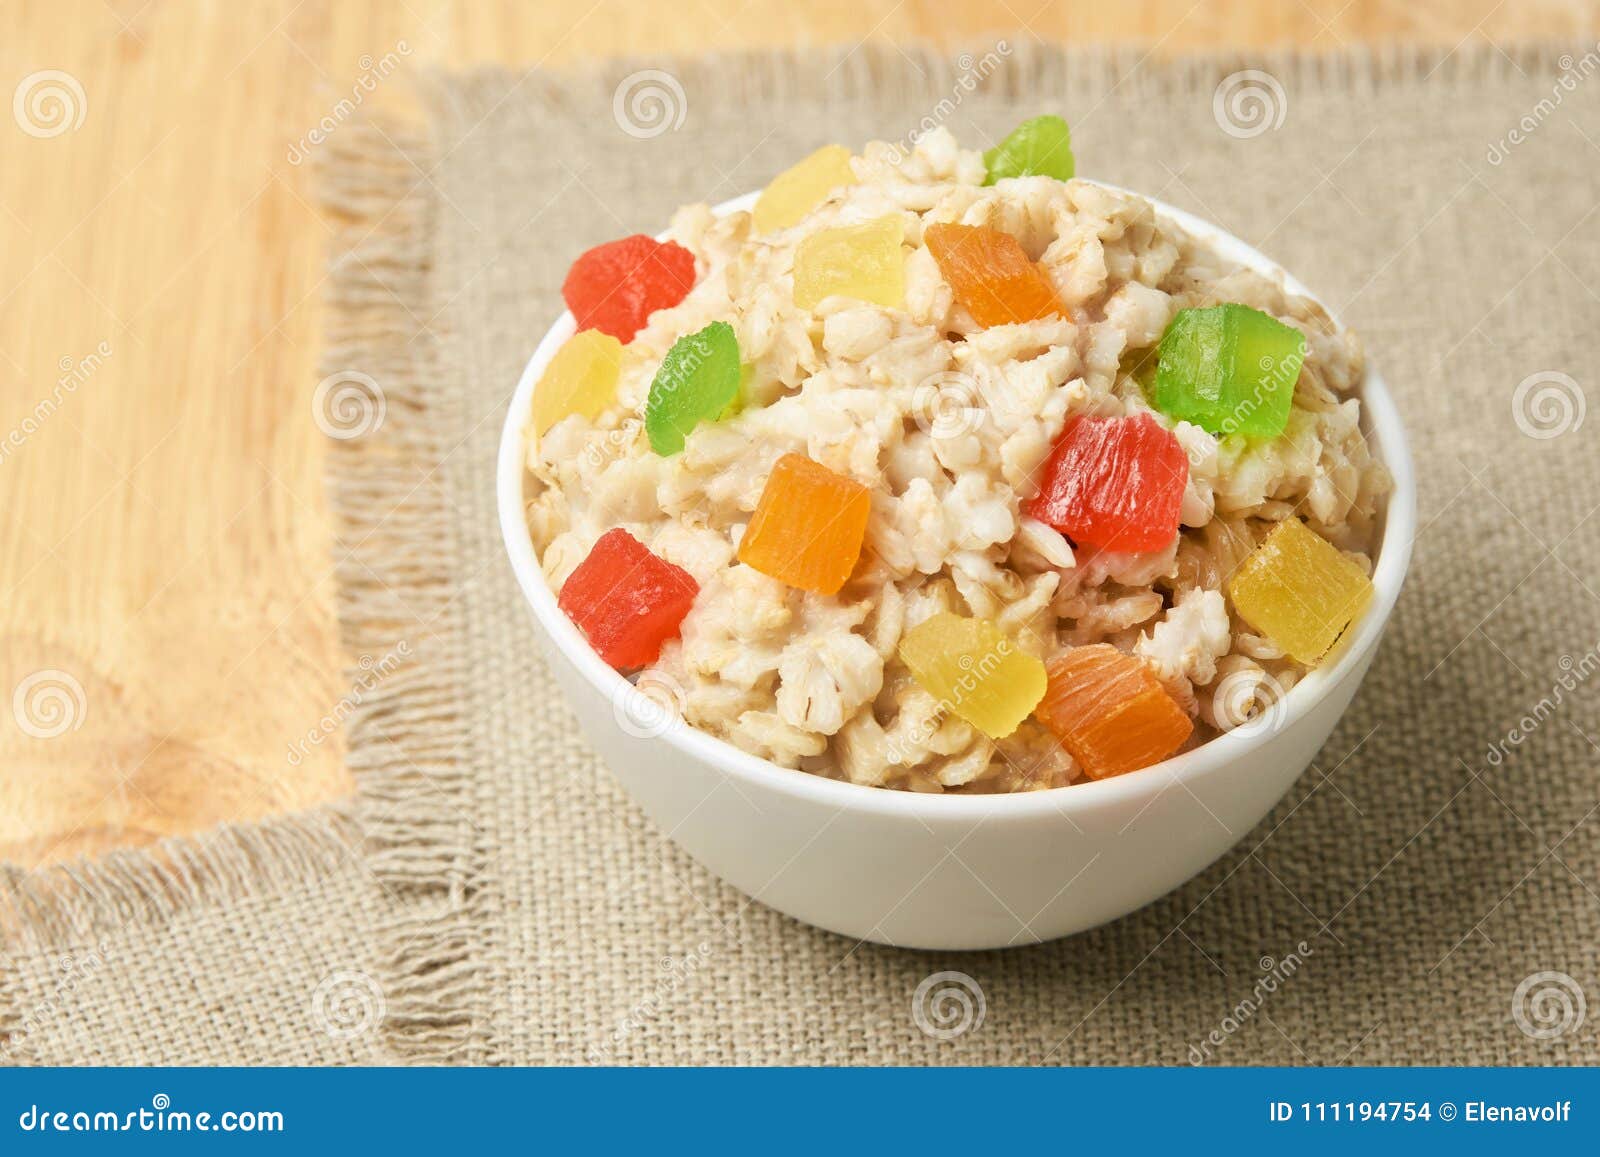 Oatmeal with Dried Fruits. Bright Colors Stock Photo - Image of berry ...